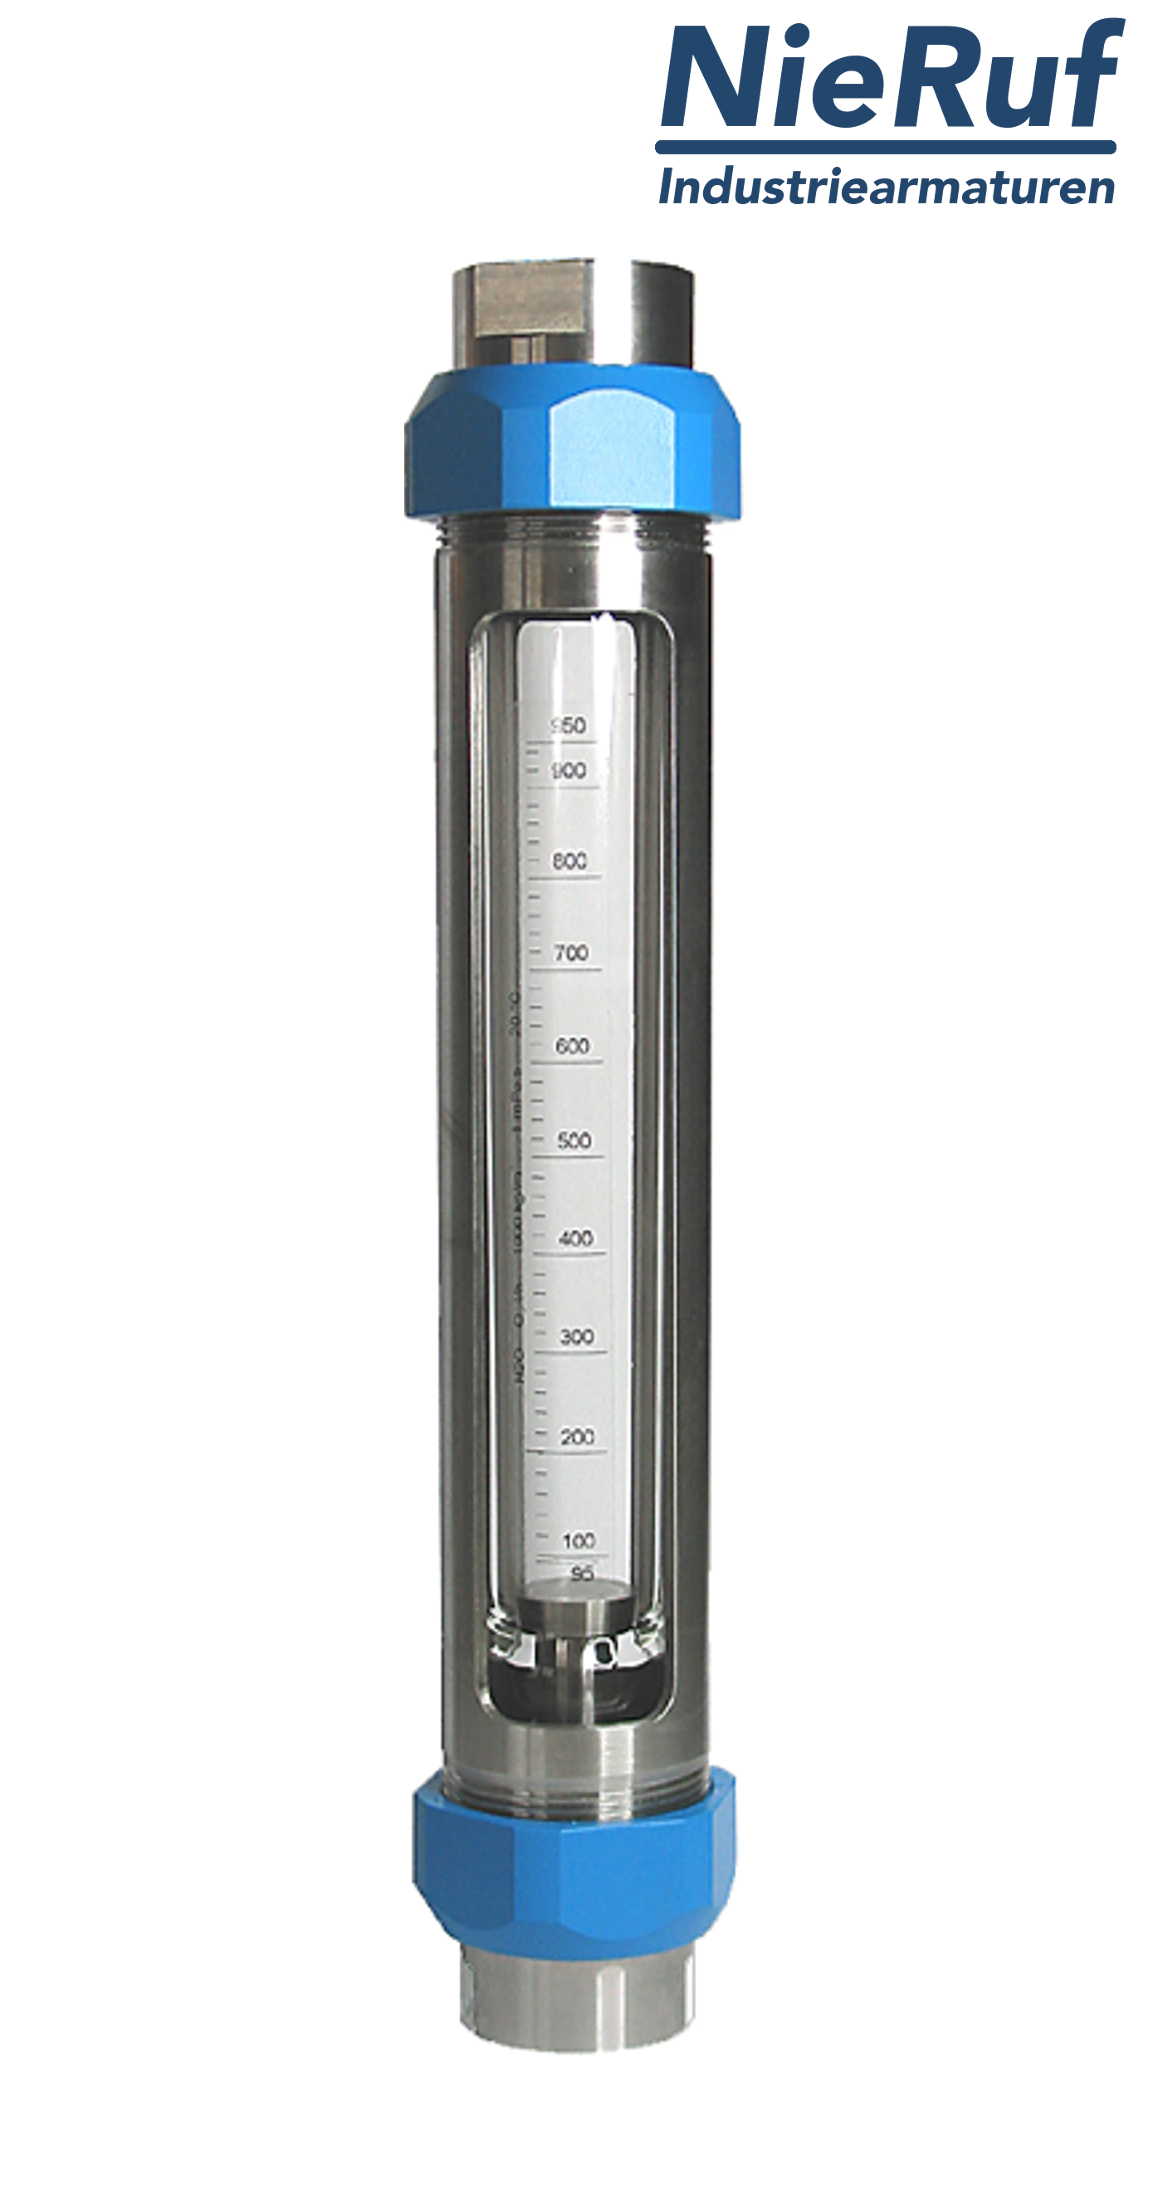 Variable area flowmeter stainless steel + borosilicate 1 1/2" inch 1000.0 - 10000 l/h water FKM